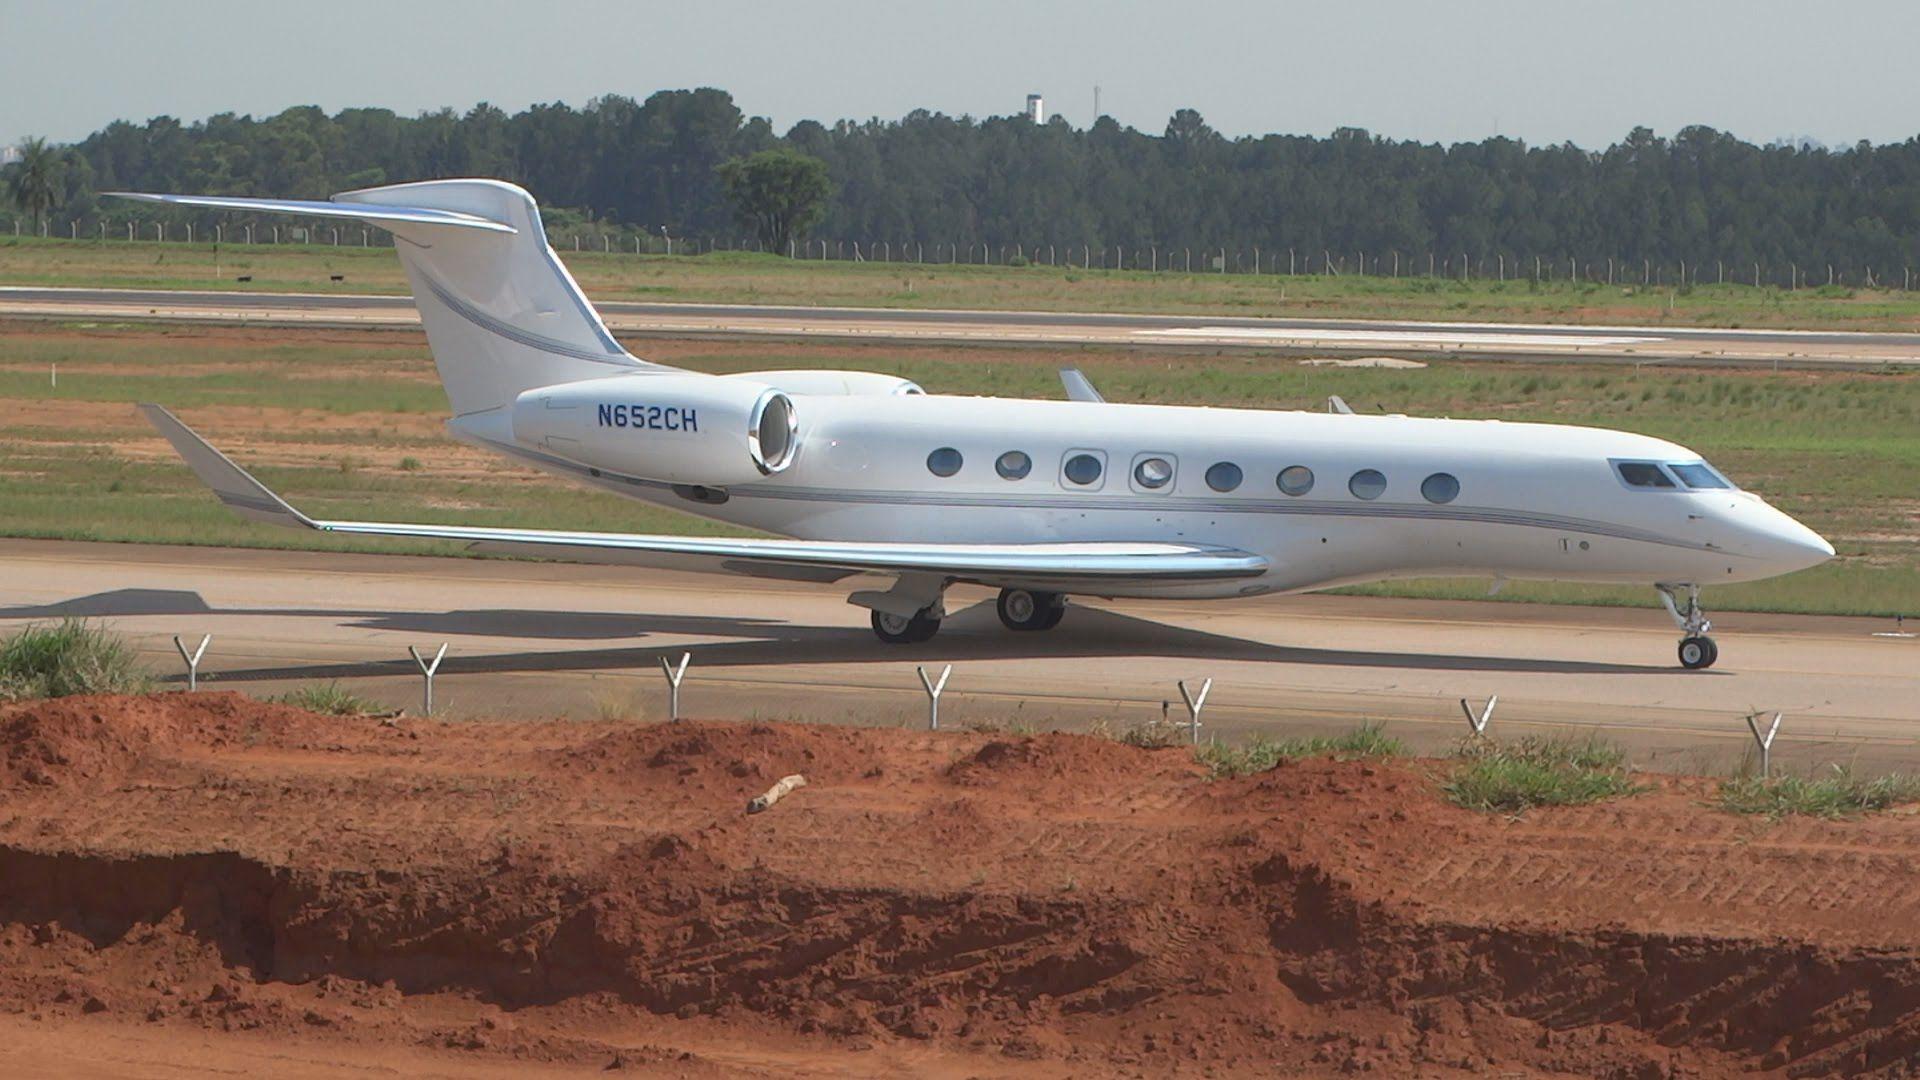 The Gulfstream G650 Is A Twin Engine Business Jet Airplane